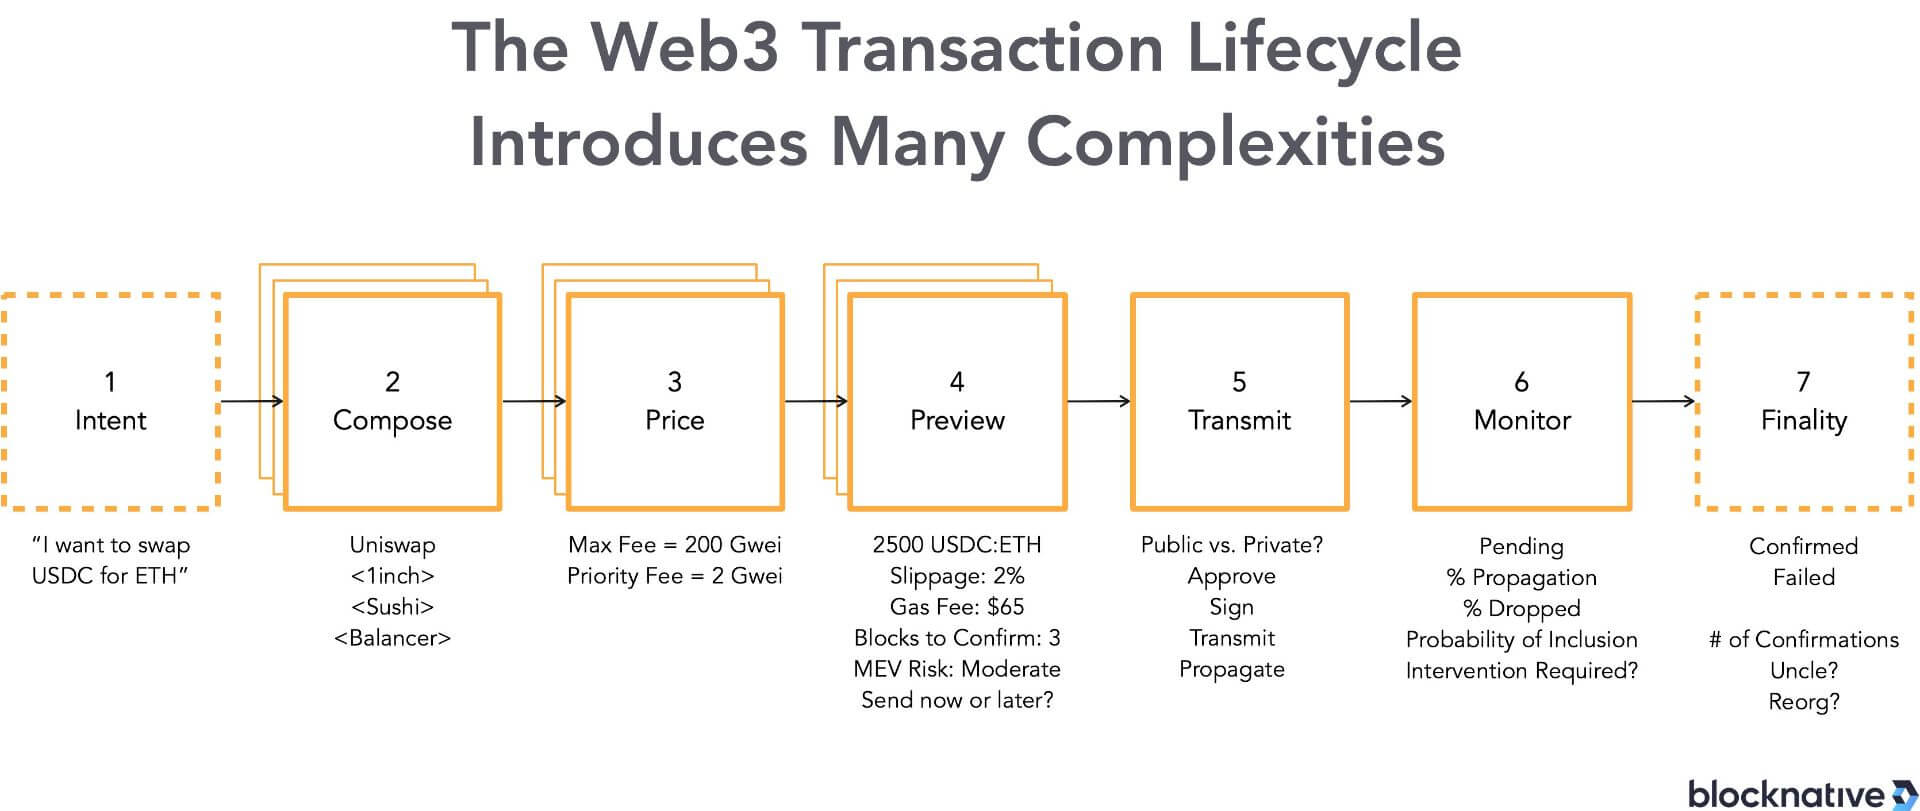 web3-tx-lifecycle-introduces-many-complexities